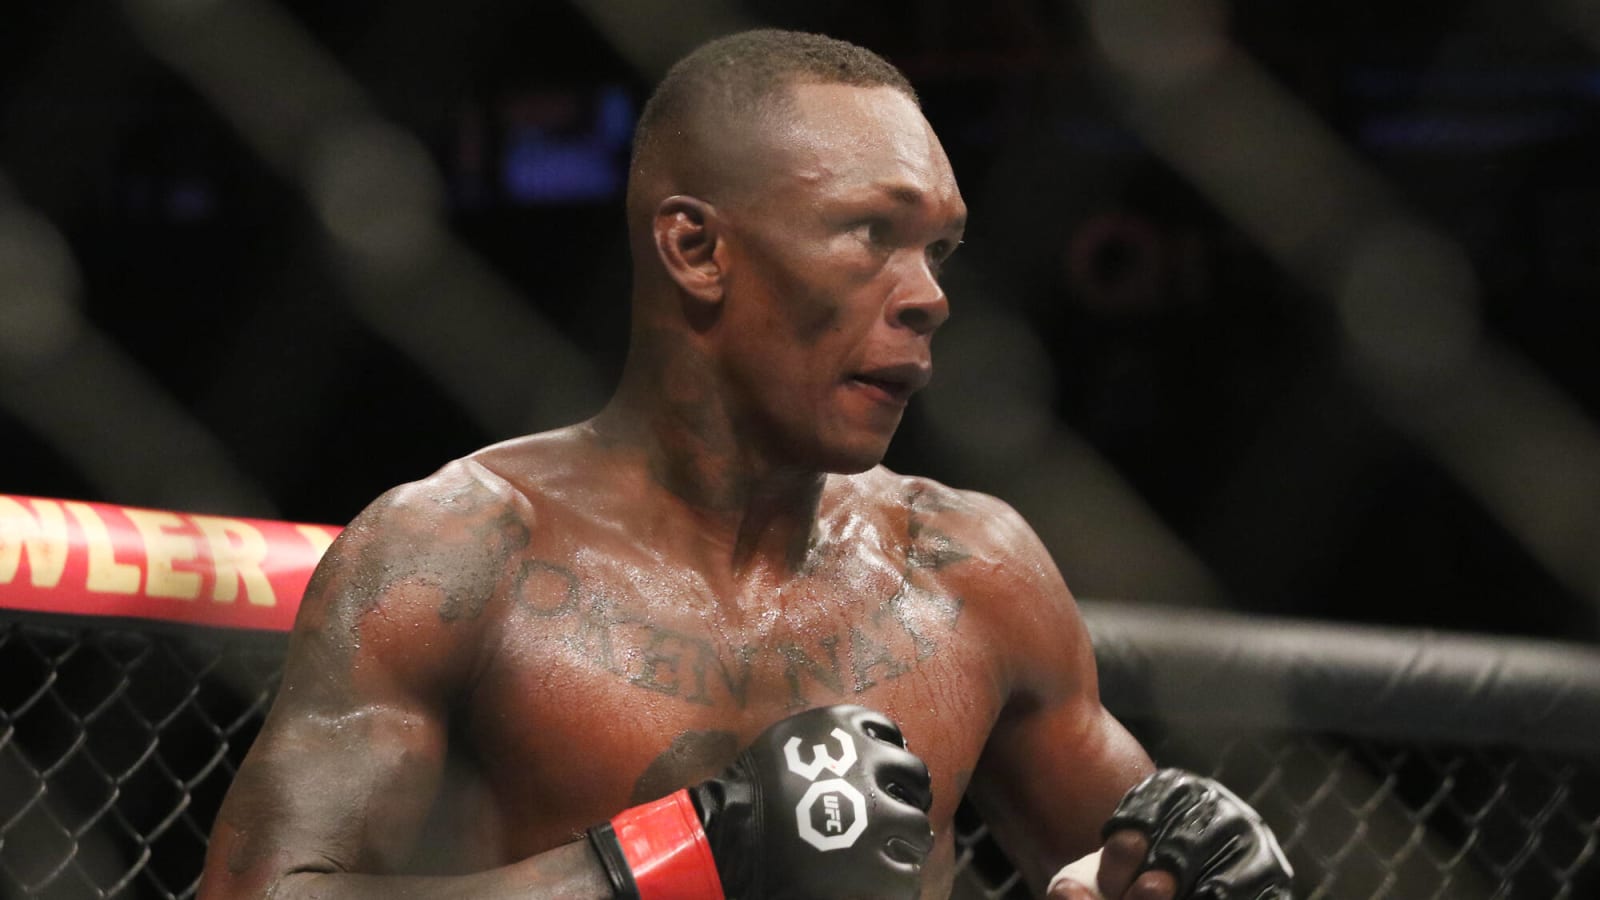 &#39;So Obsessed With Trying To Downplay Israel Adesanya’s HOF Worthy Career?&#39; - MMA Fans Called Out For Criticizing Jamahal Hill Working With &#39;Izzy&#39; Ahead Of UFC 300